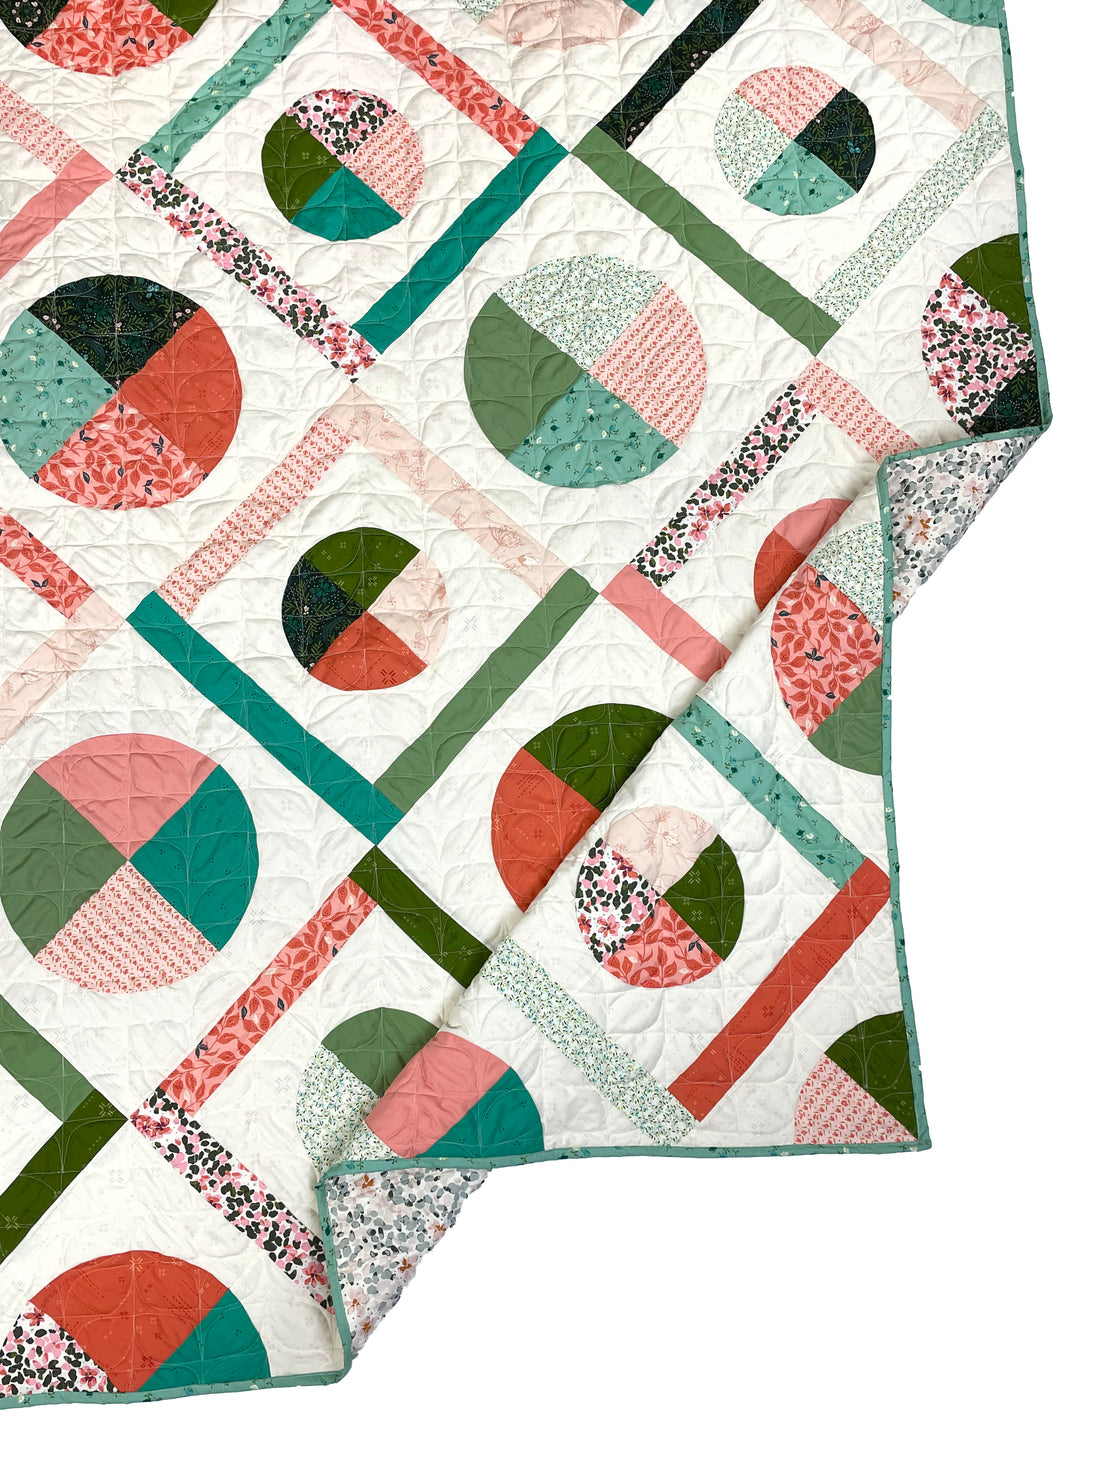 Dora May is here! Read the story behind the quilt!